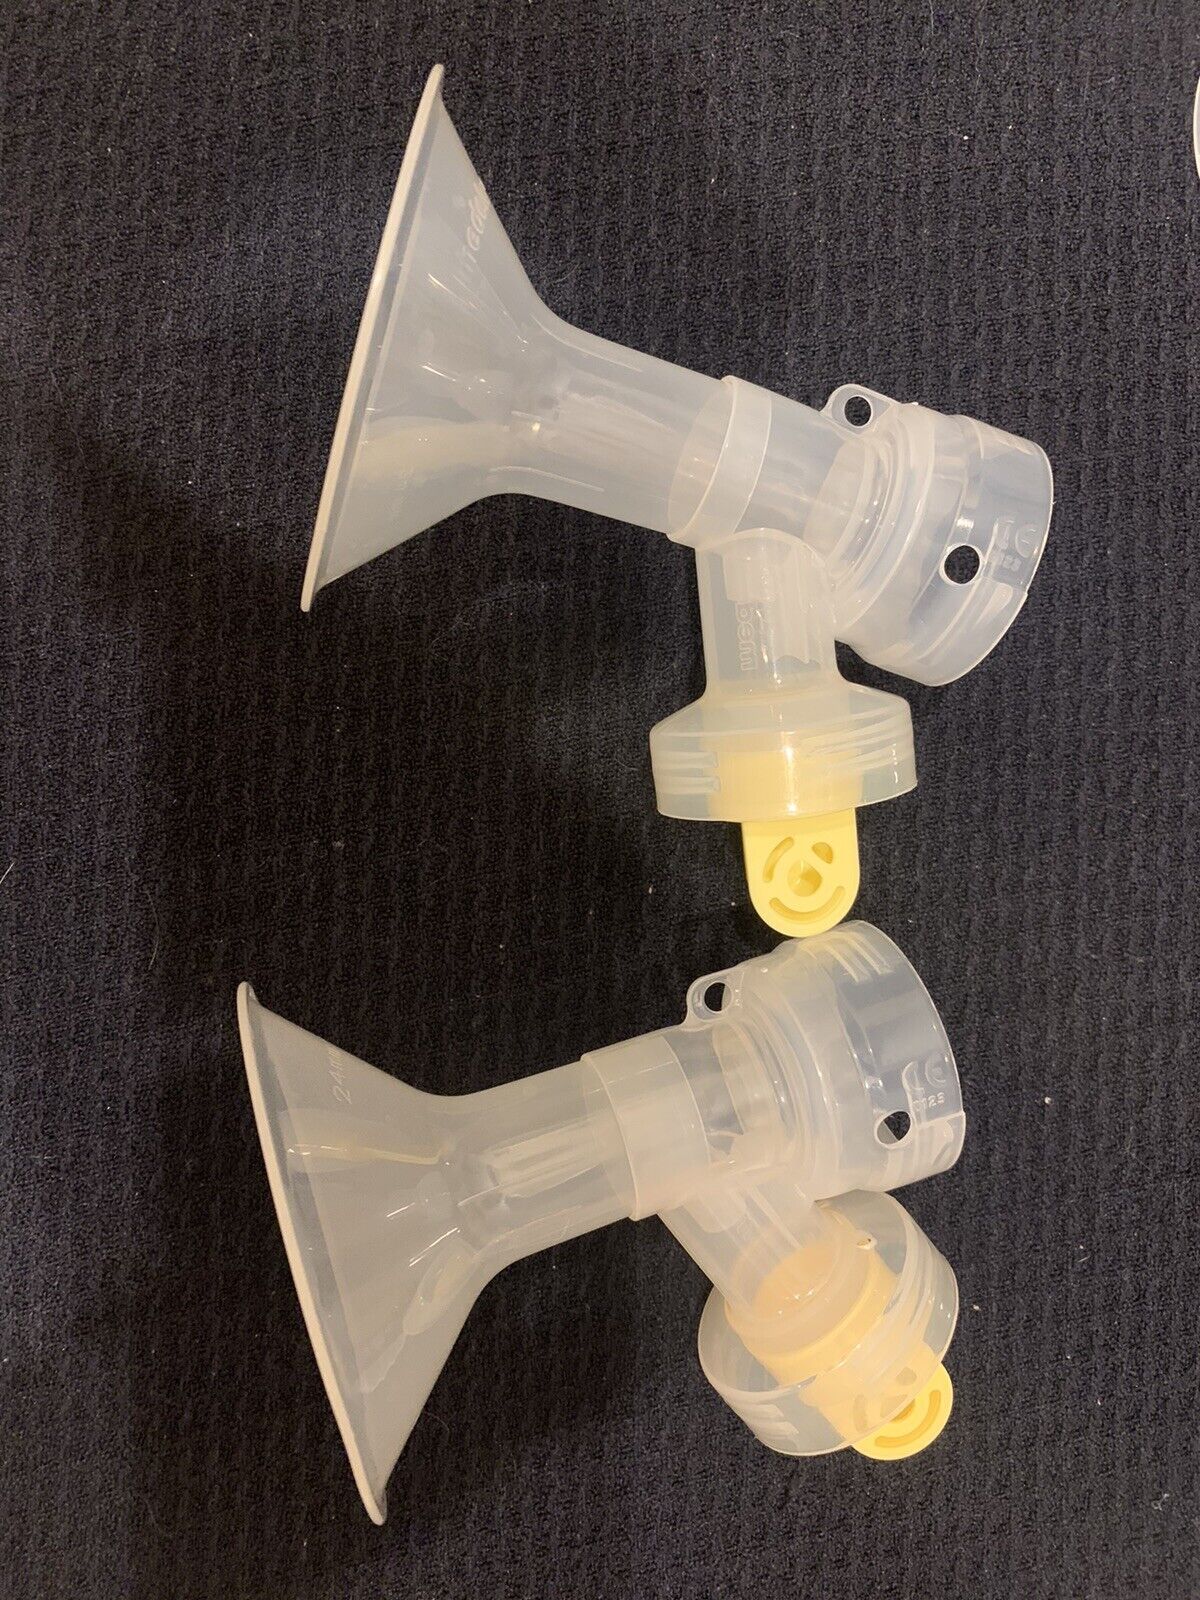 Used Pair Of Medela Brand Breast Pump Breast Shields With Valve,